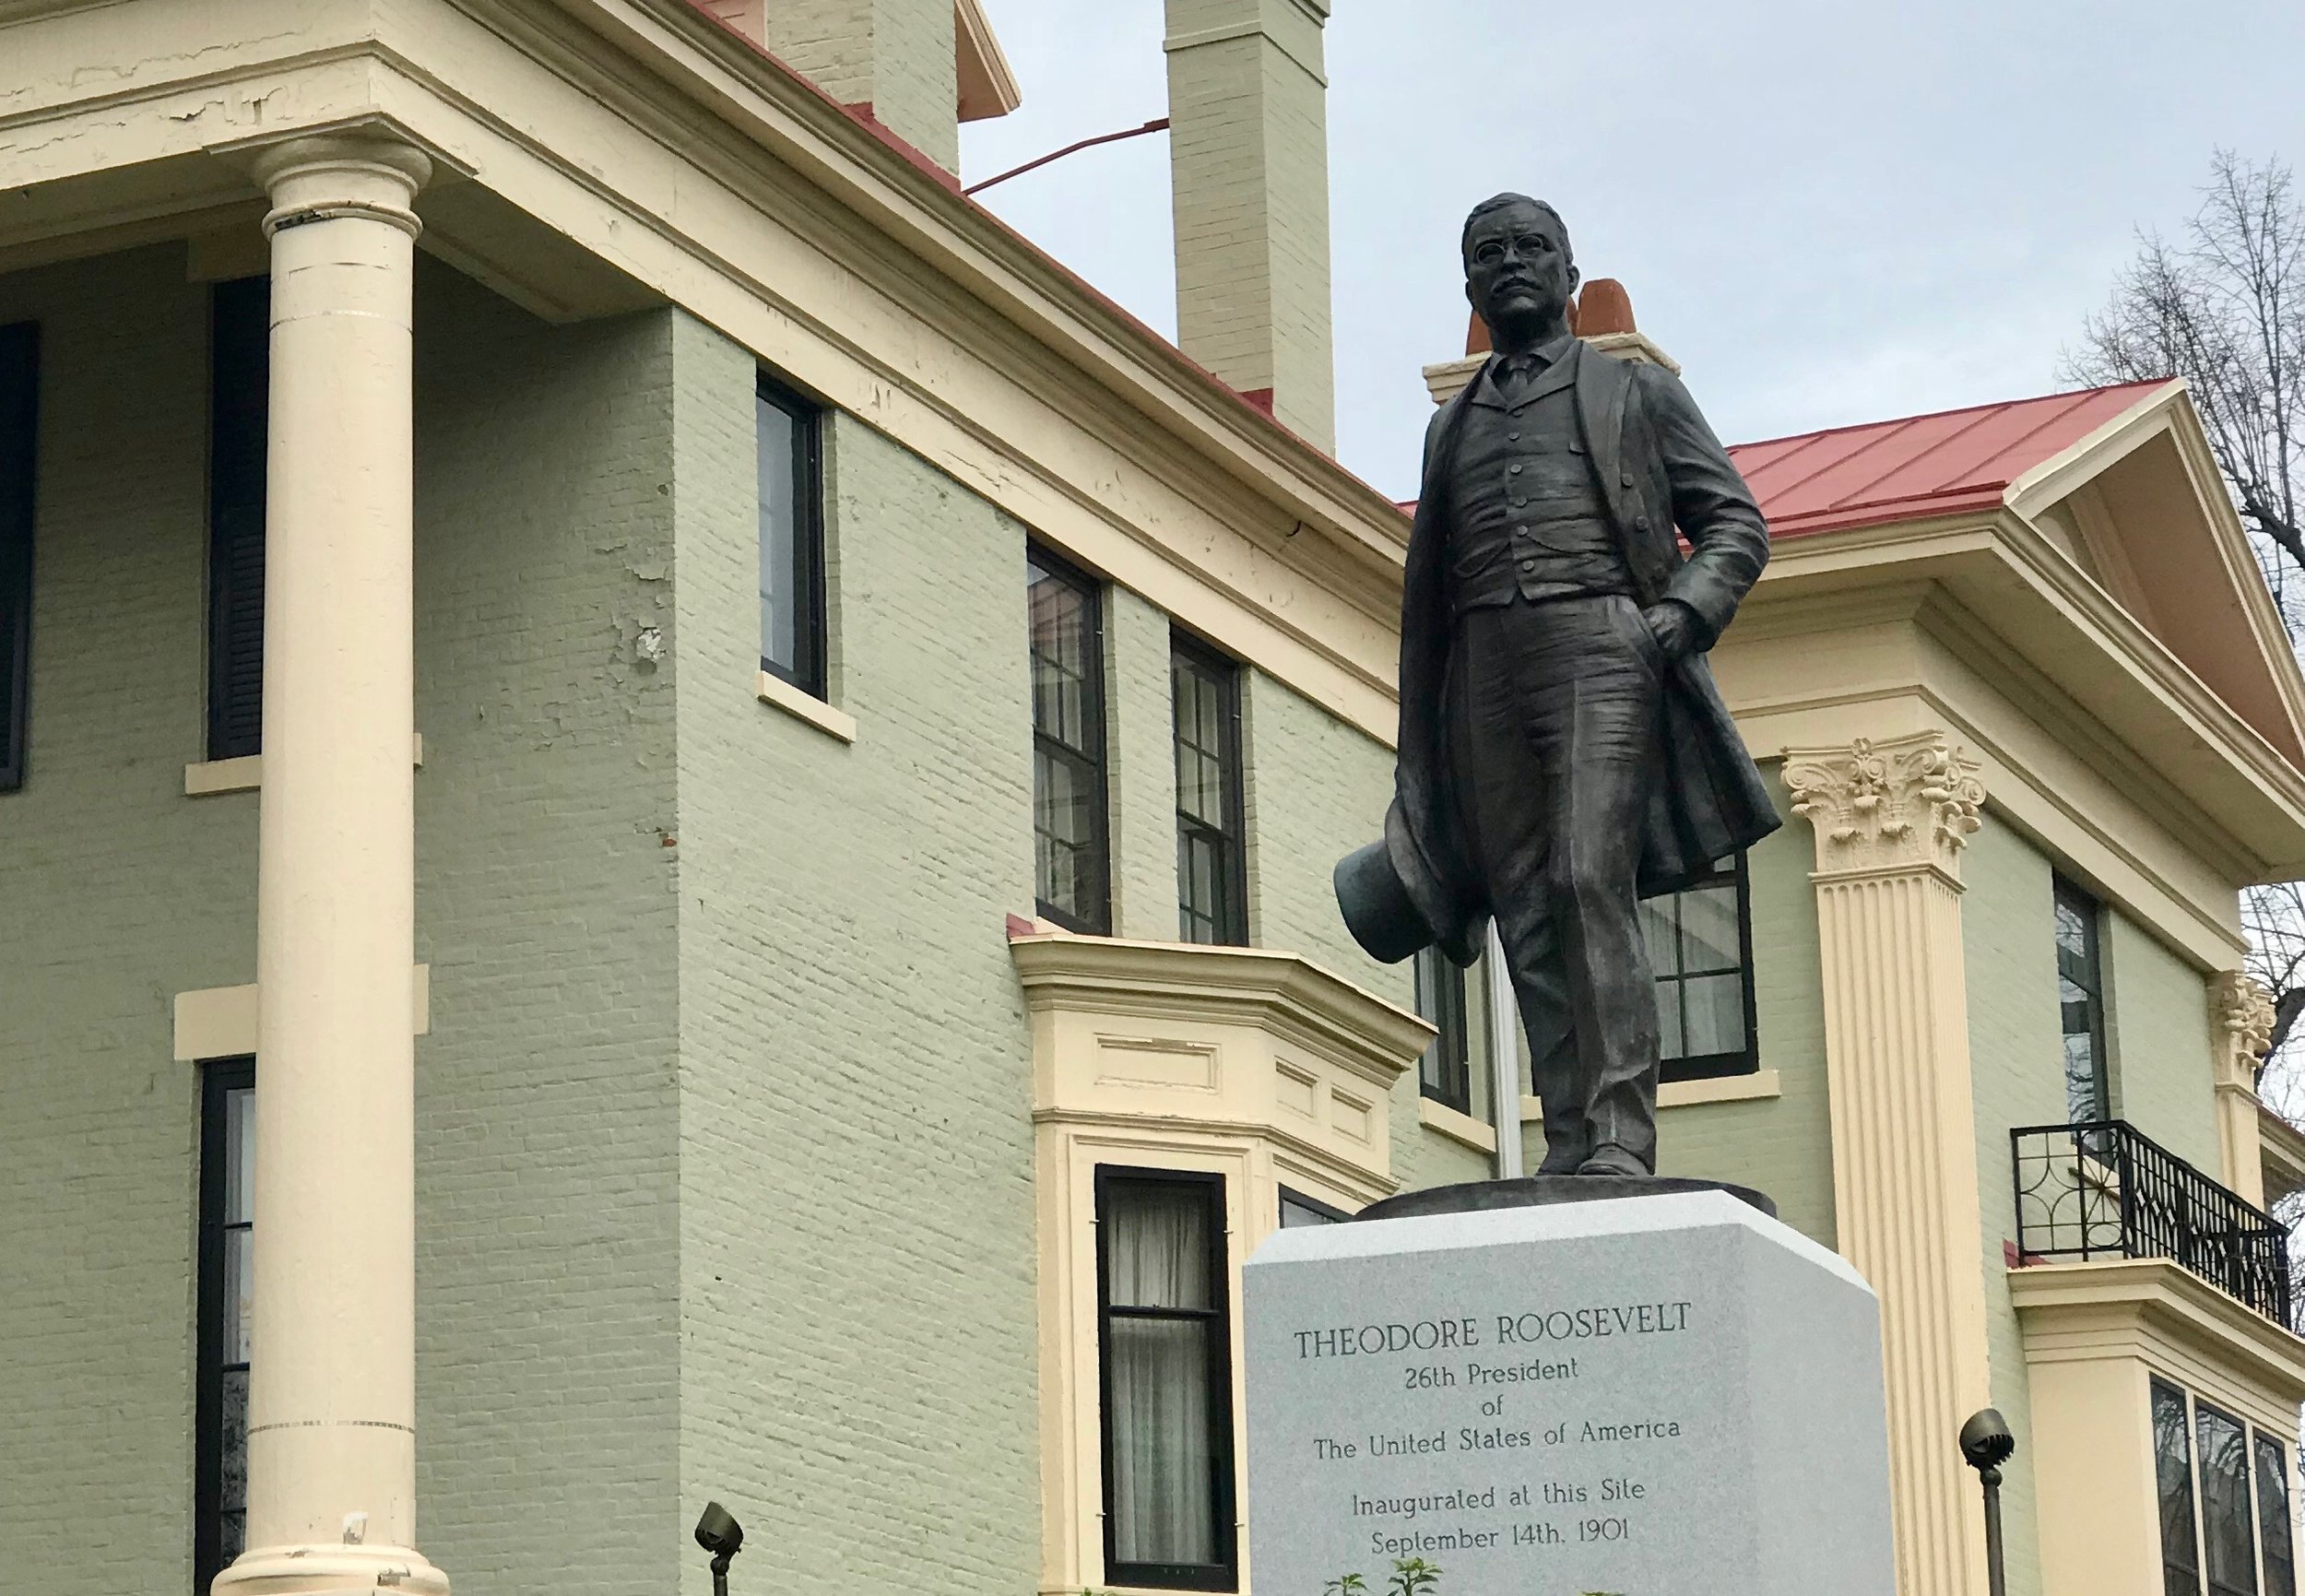  A statue of Theodore Roosevelt stands by the house where he was sworn in as president. 